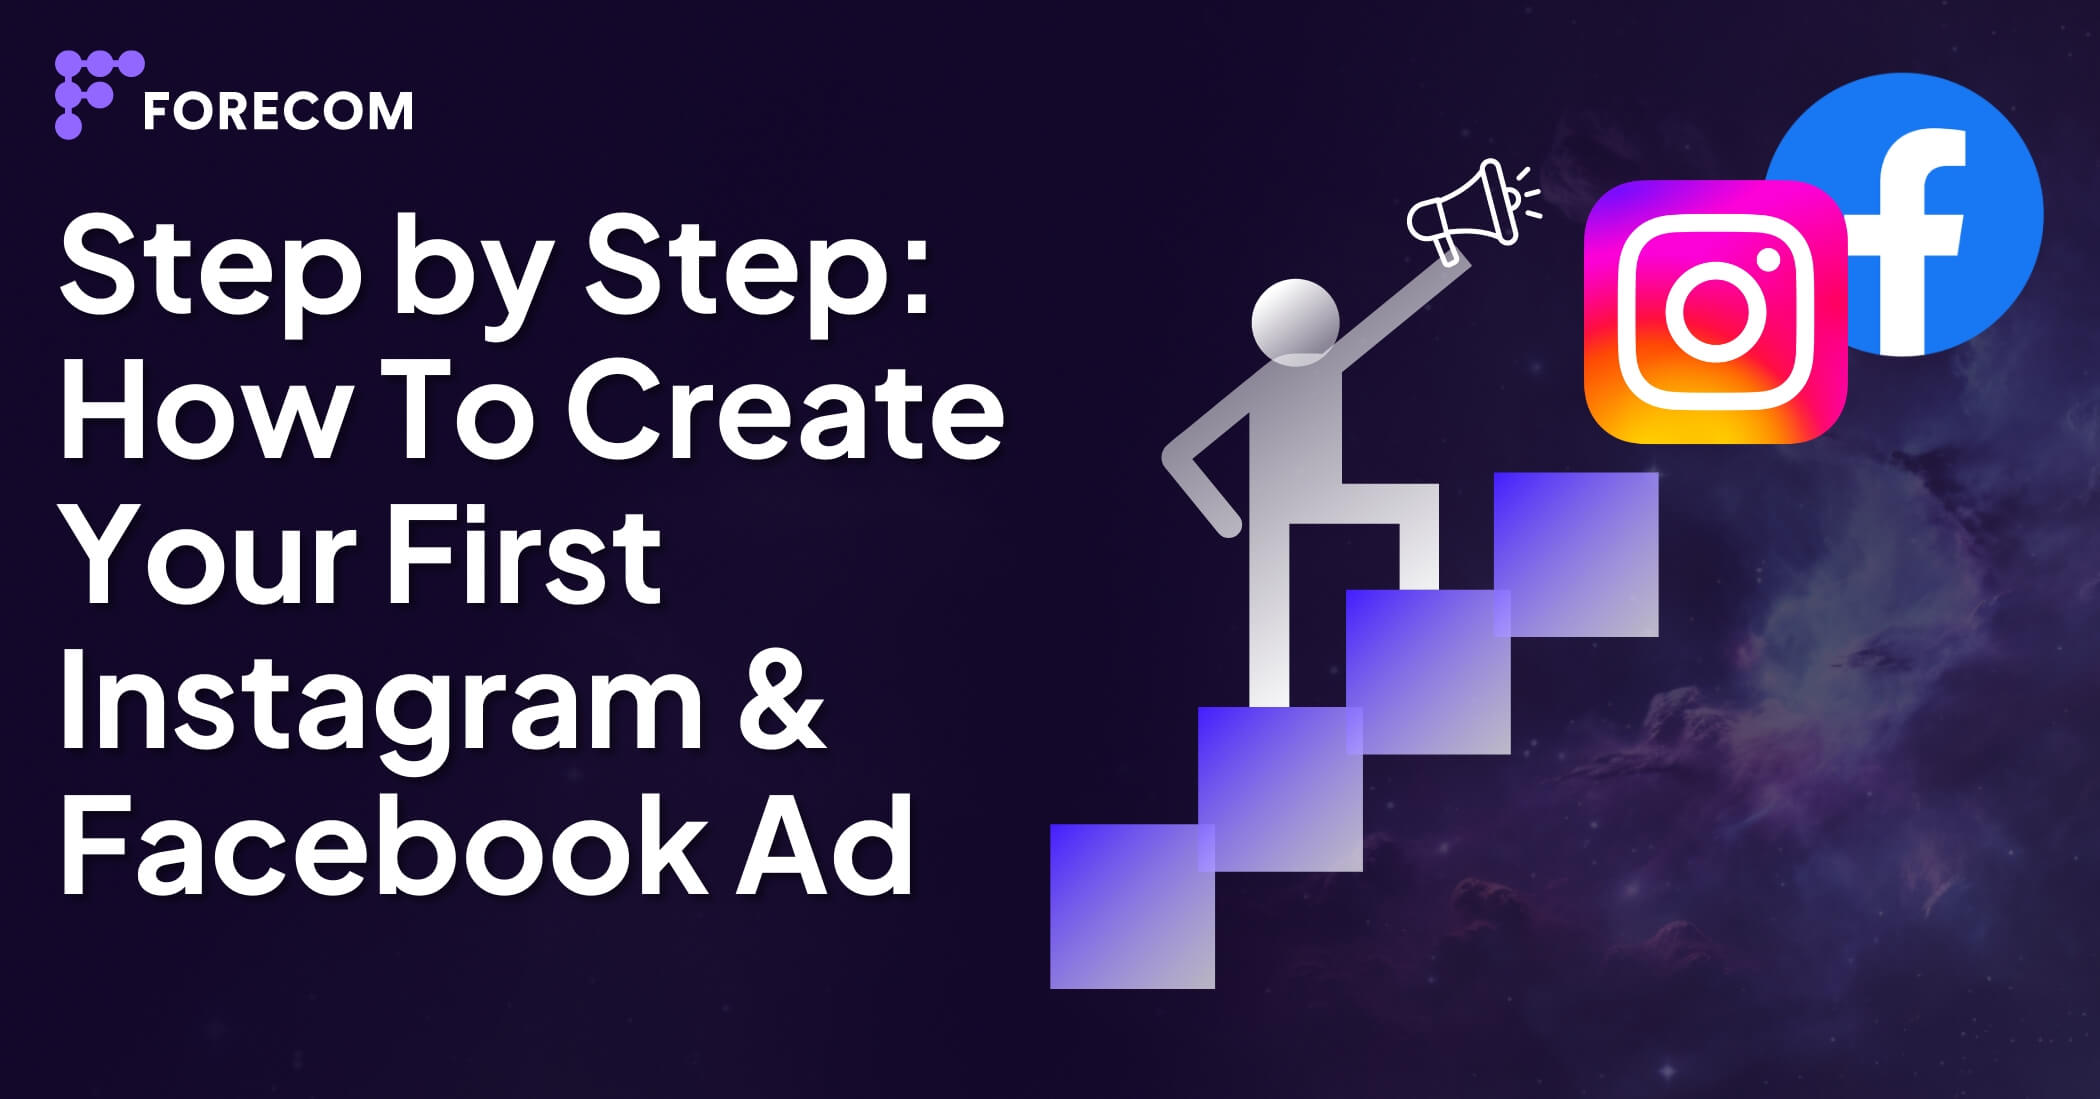 Step by Step: How To Create Your First Instagram & Facebook Ad